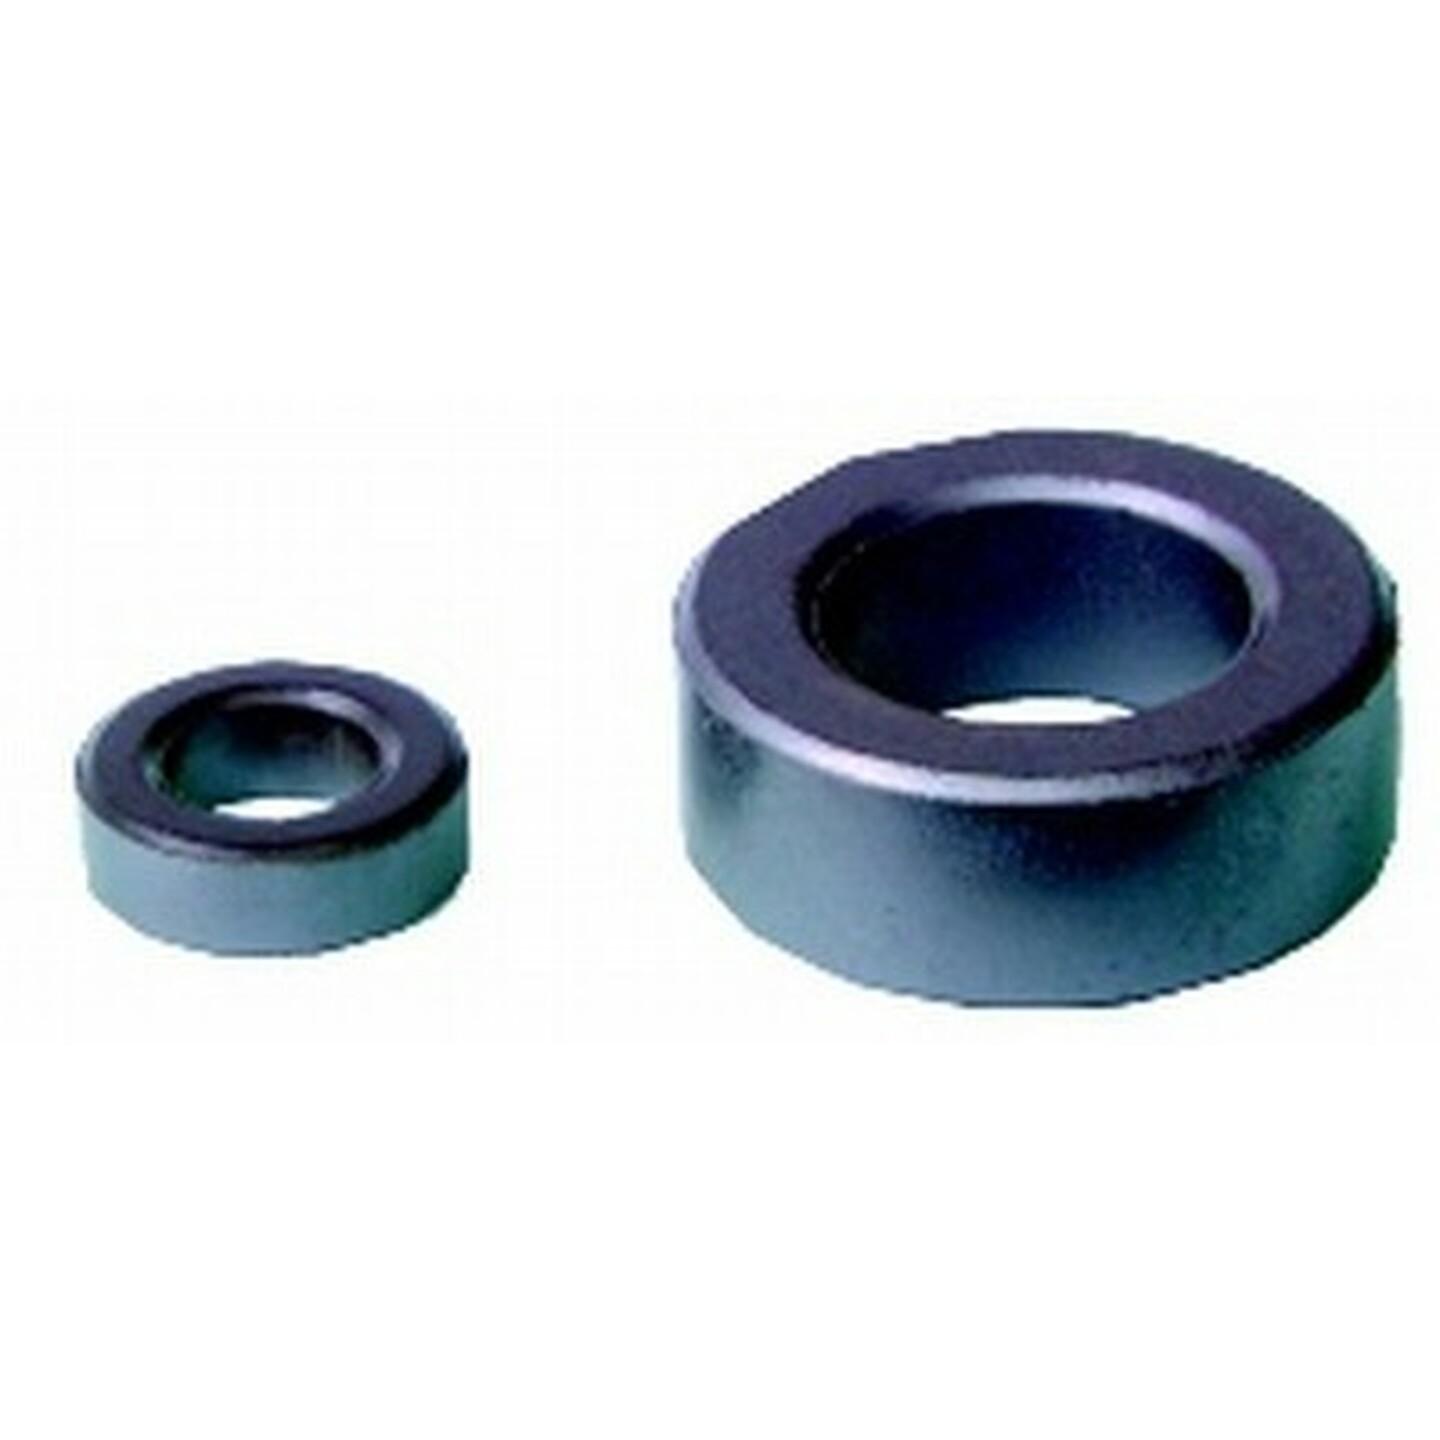 L15 35x21x13mm Toroid or Ring Cores - Pack of 2